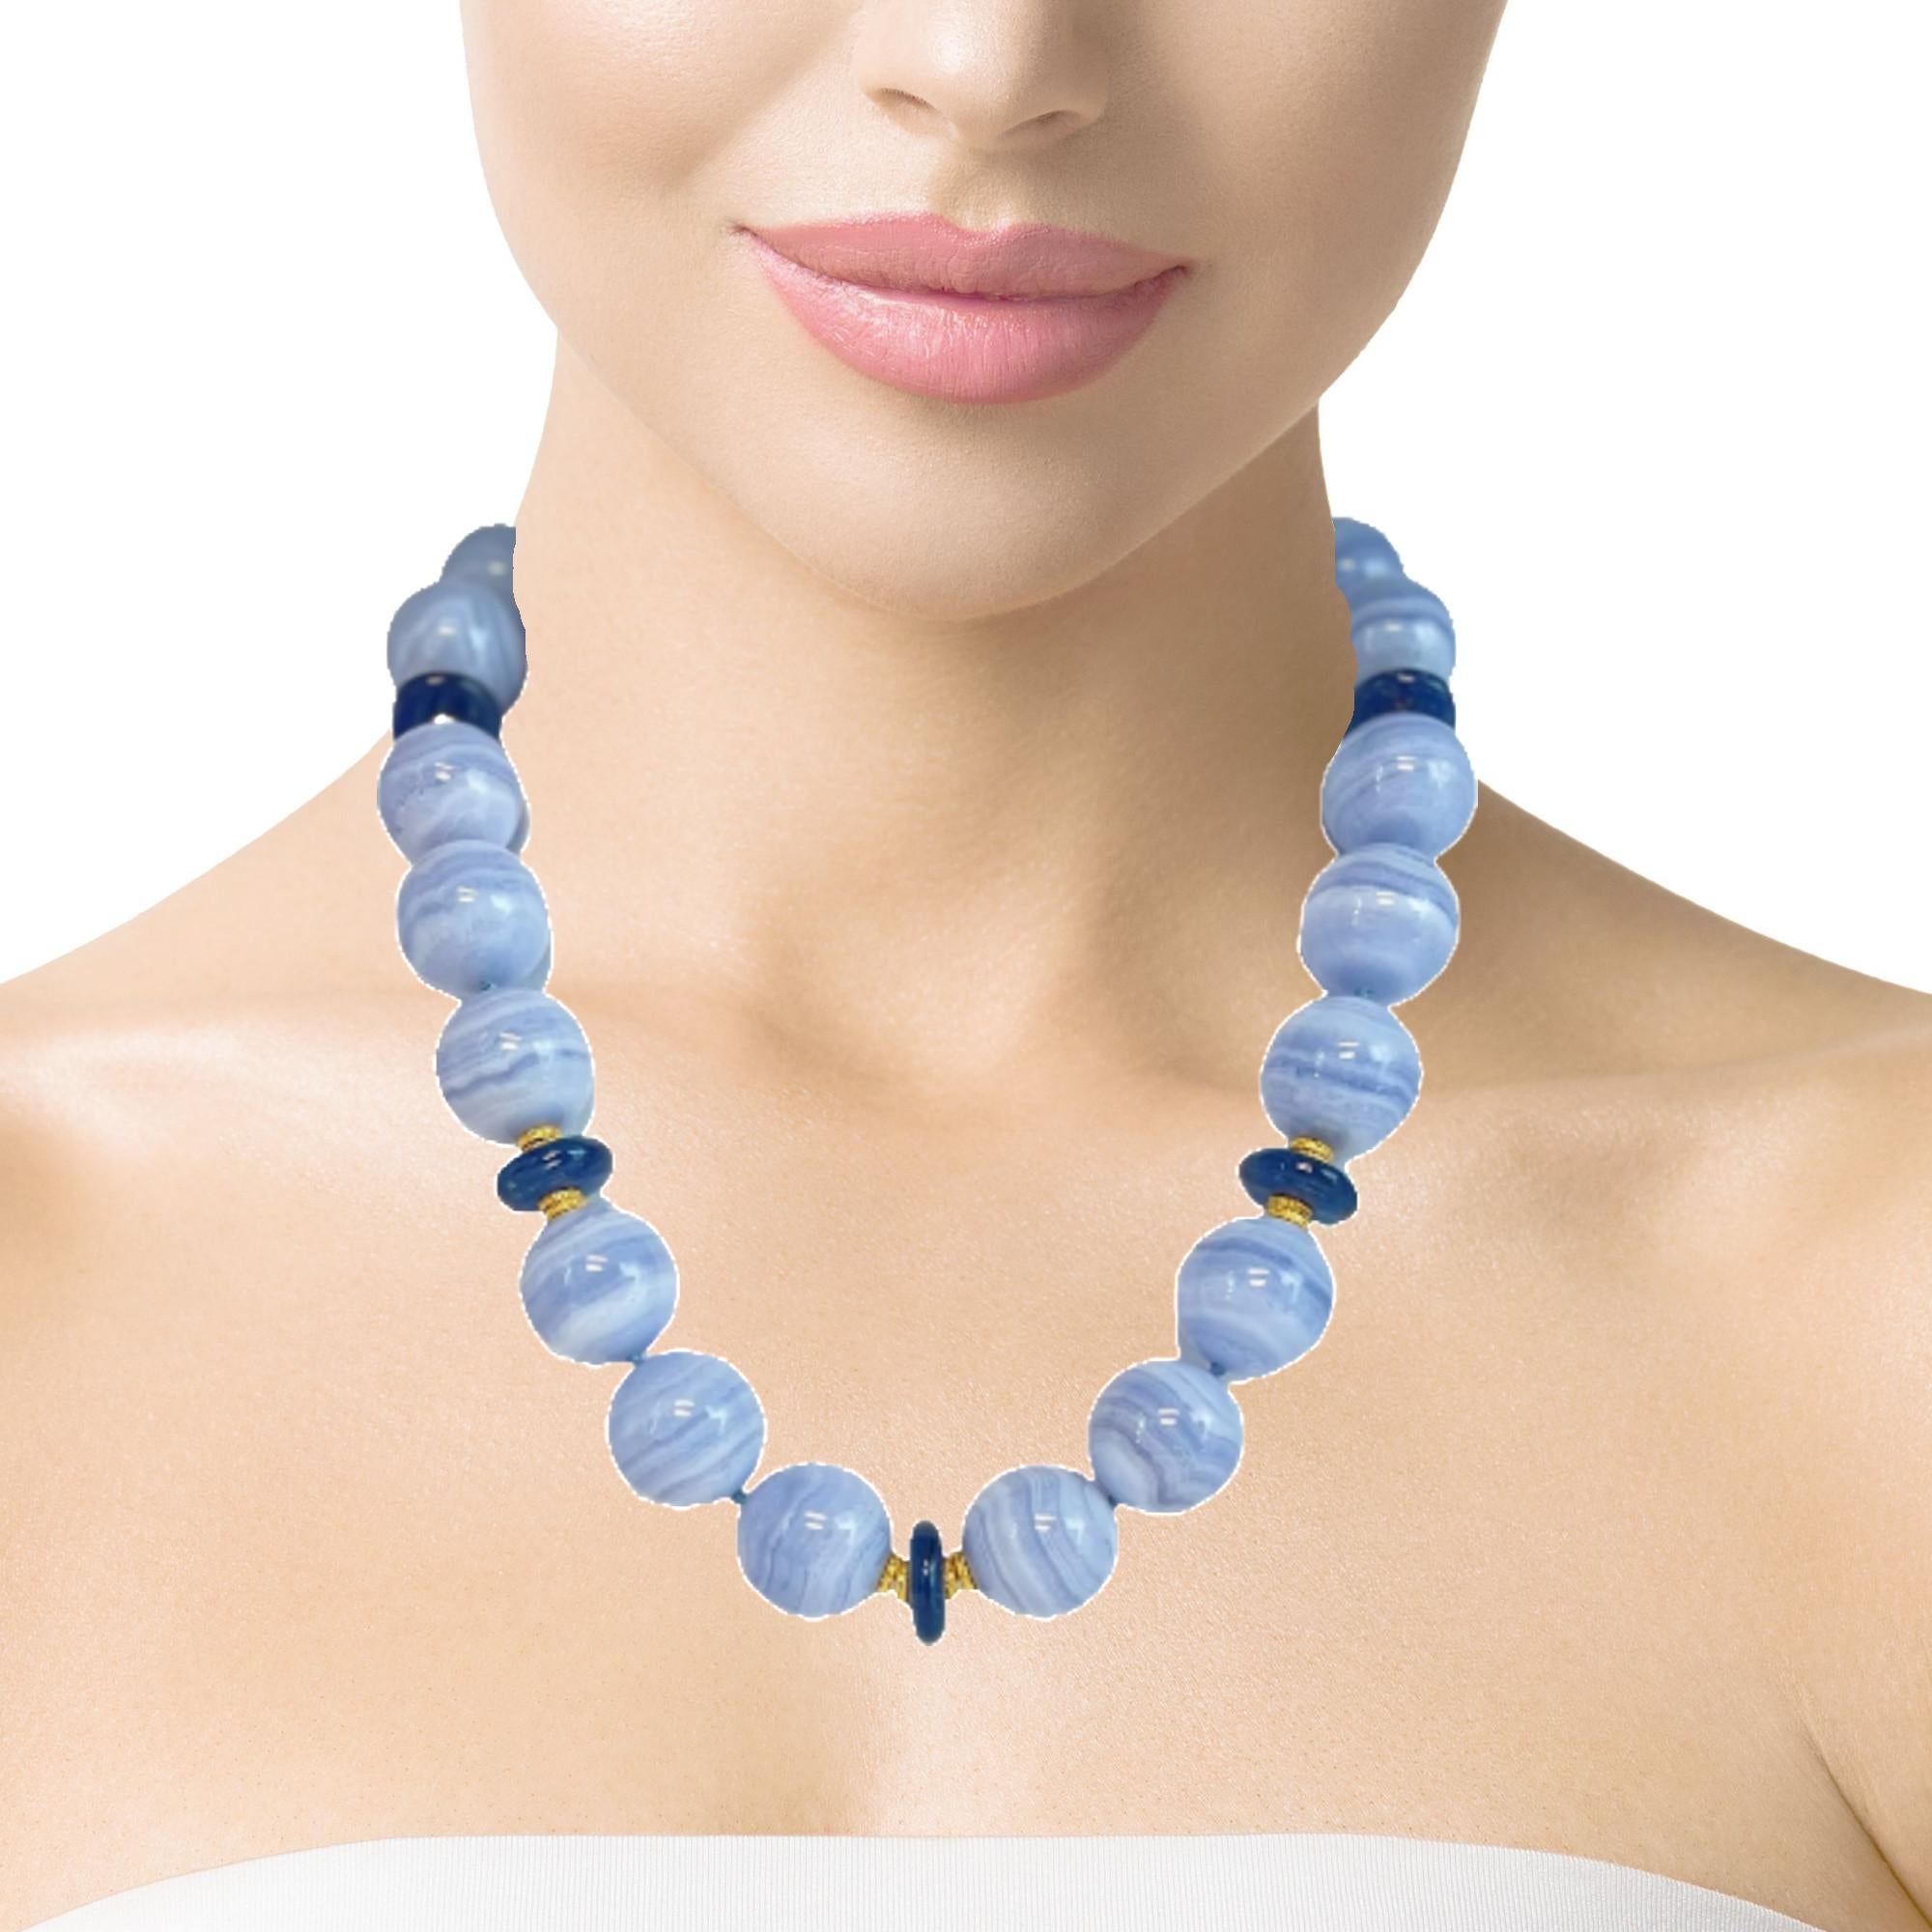 20mm Round Blue Lace Agate and Kyanite Bead Necklace with Yellow Gold Accents For Sale 3